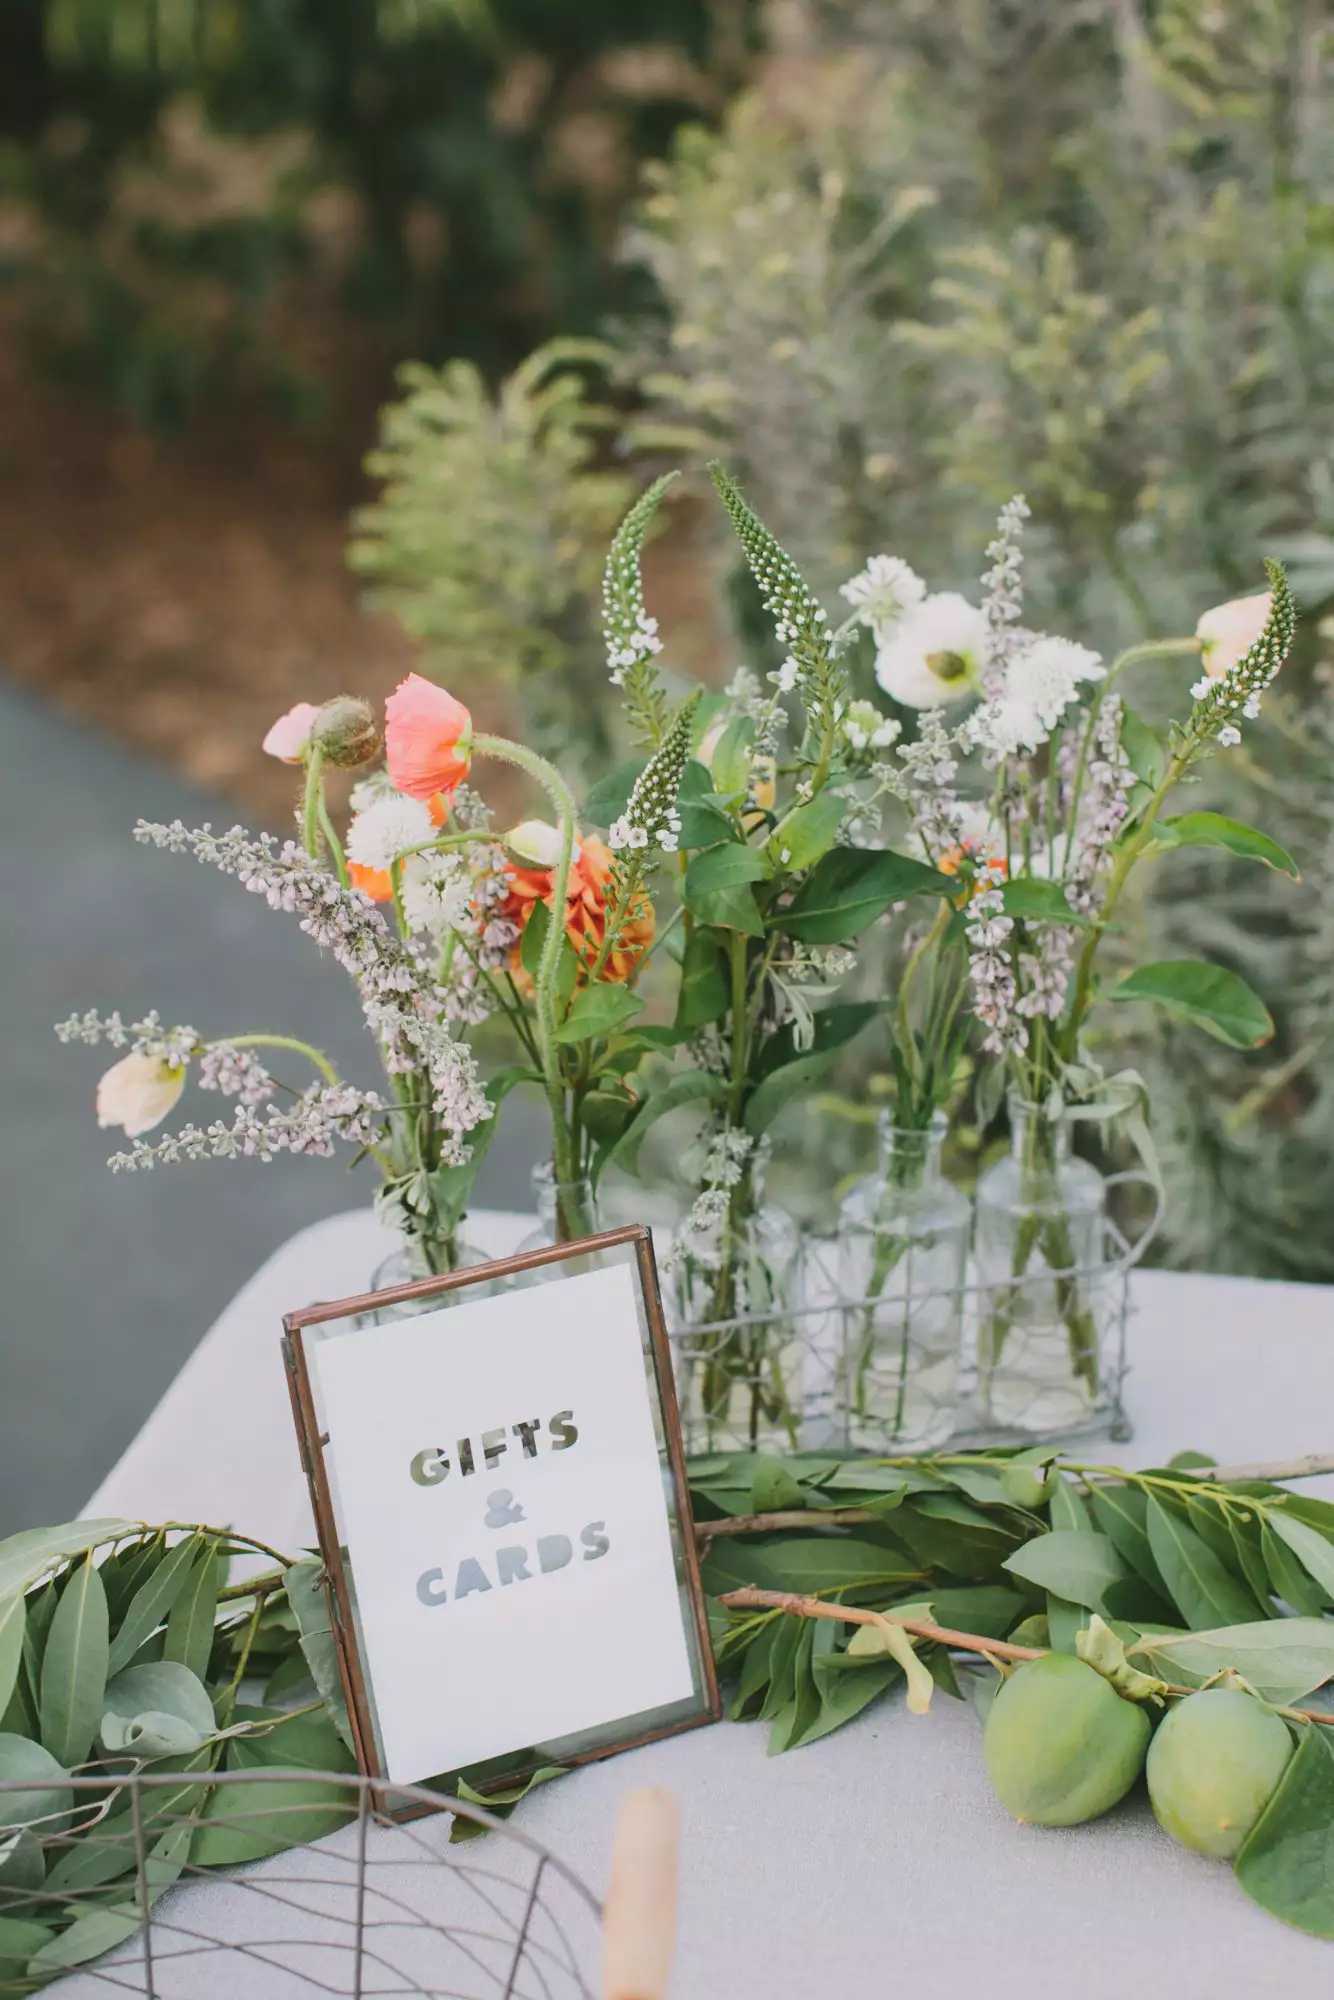 Should You Bring a Separate Card If You’re Sending a Gift to the Bridal Shower or Wedding?